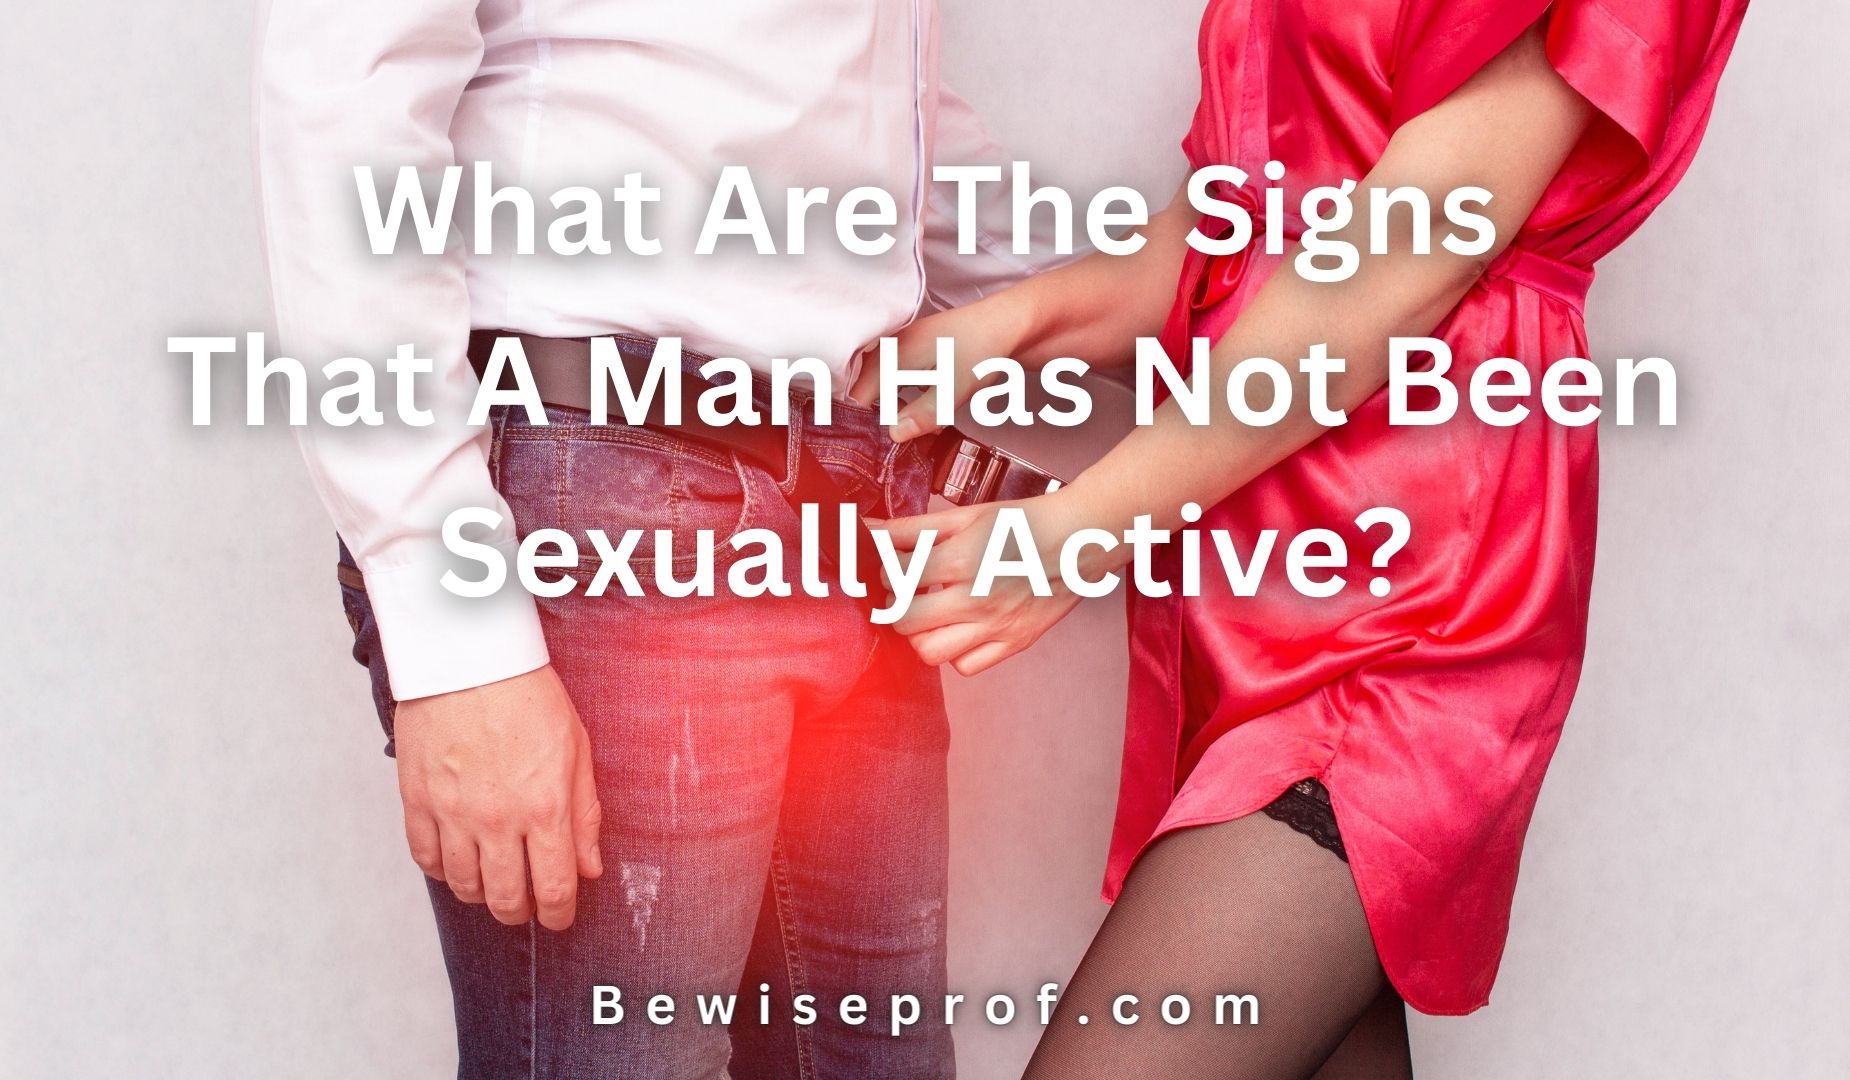 What Are The Signs That A Man Has Not Been Sexually Active?